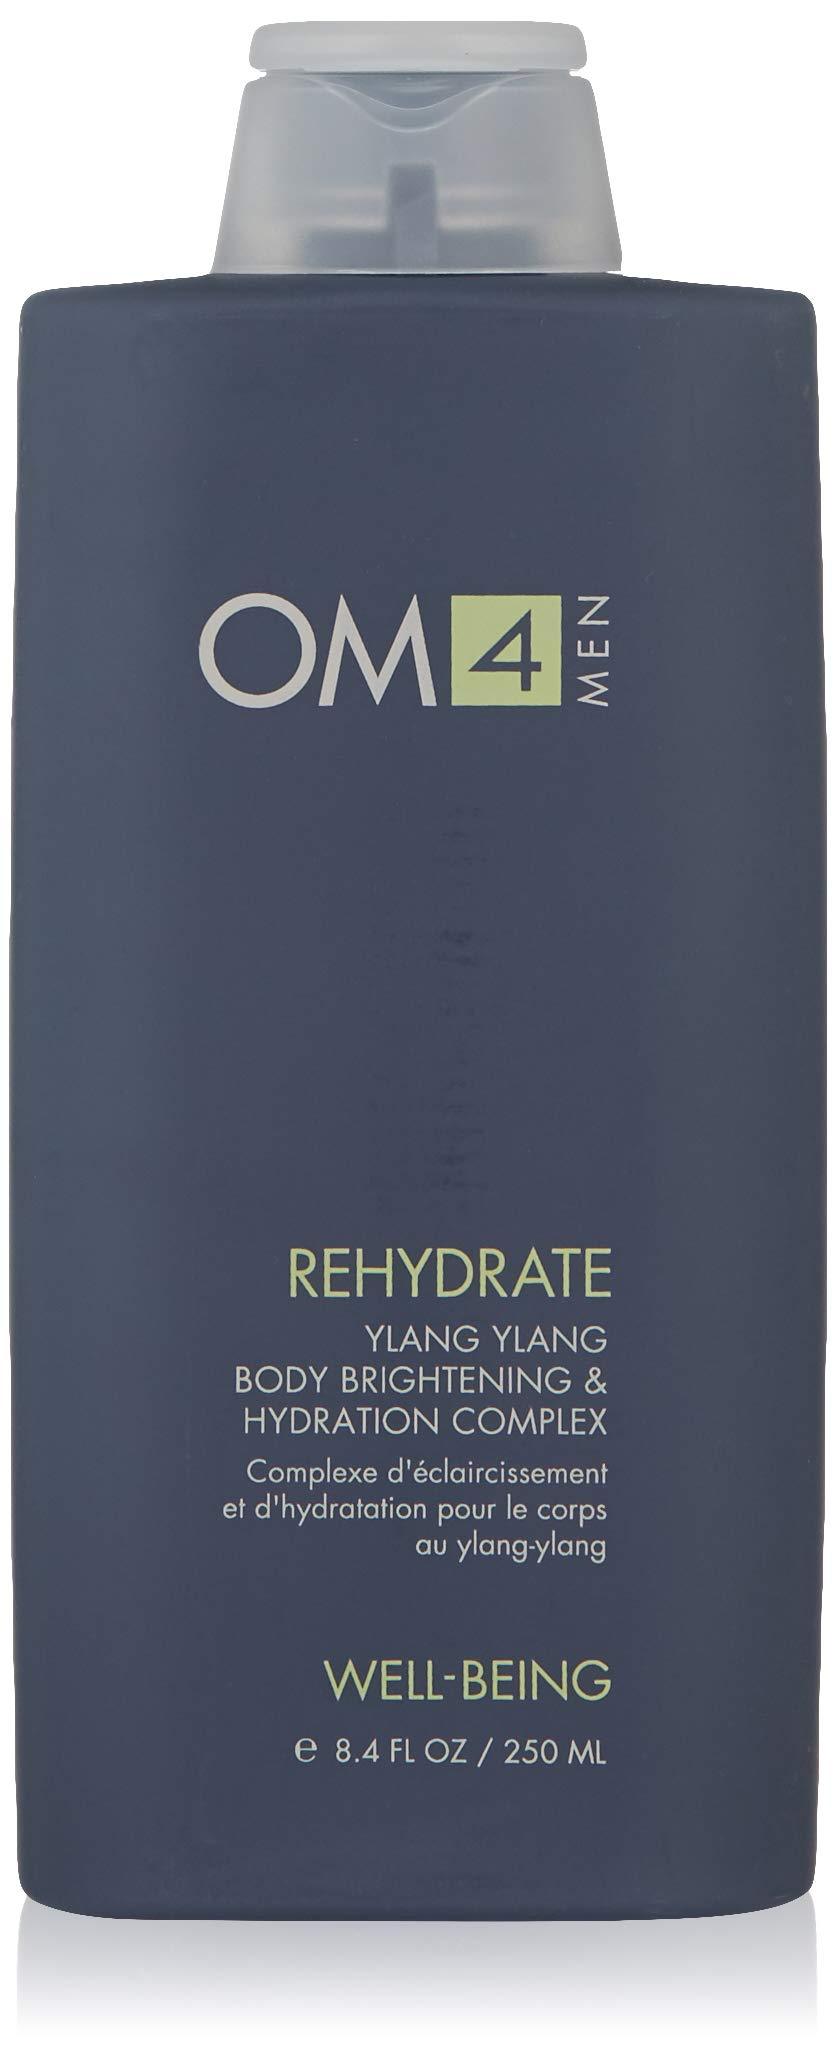 Organic Male OM4 Rehydrate: Ylang Ylang Brightening & Hydration Complex Body Lotion, 8.4 oz. - BeesActive Australia